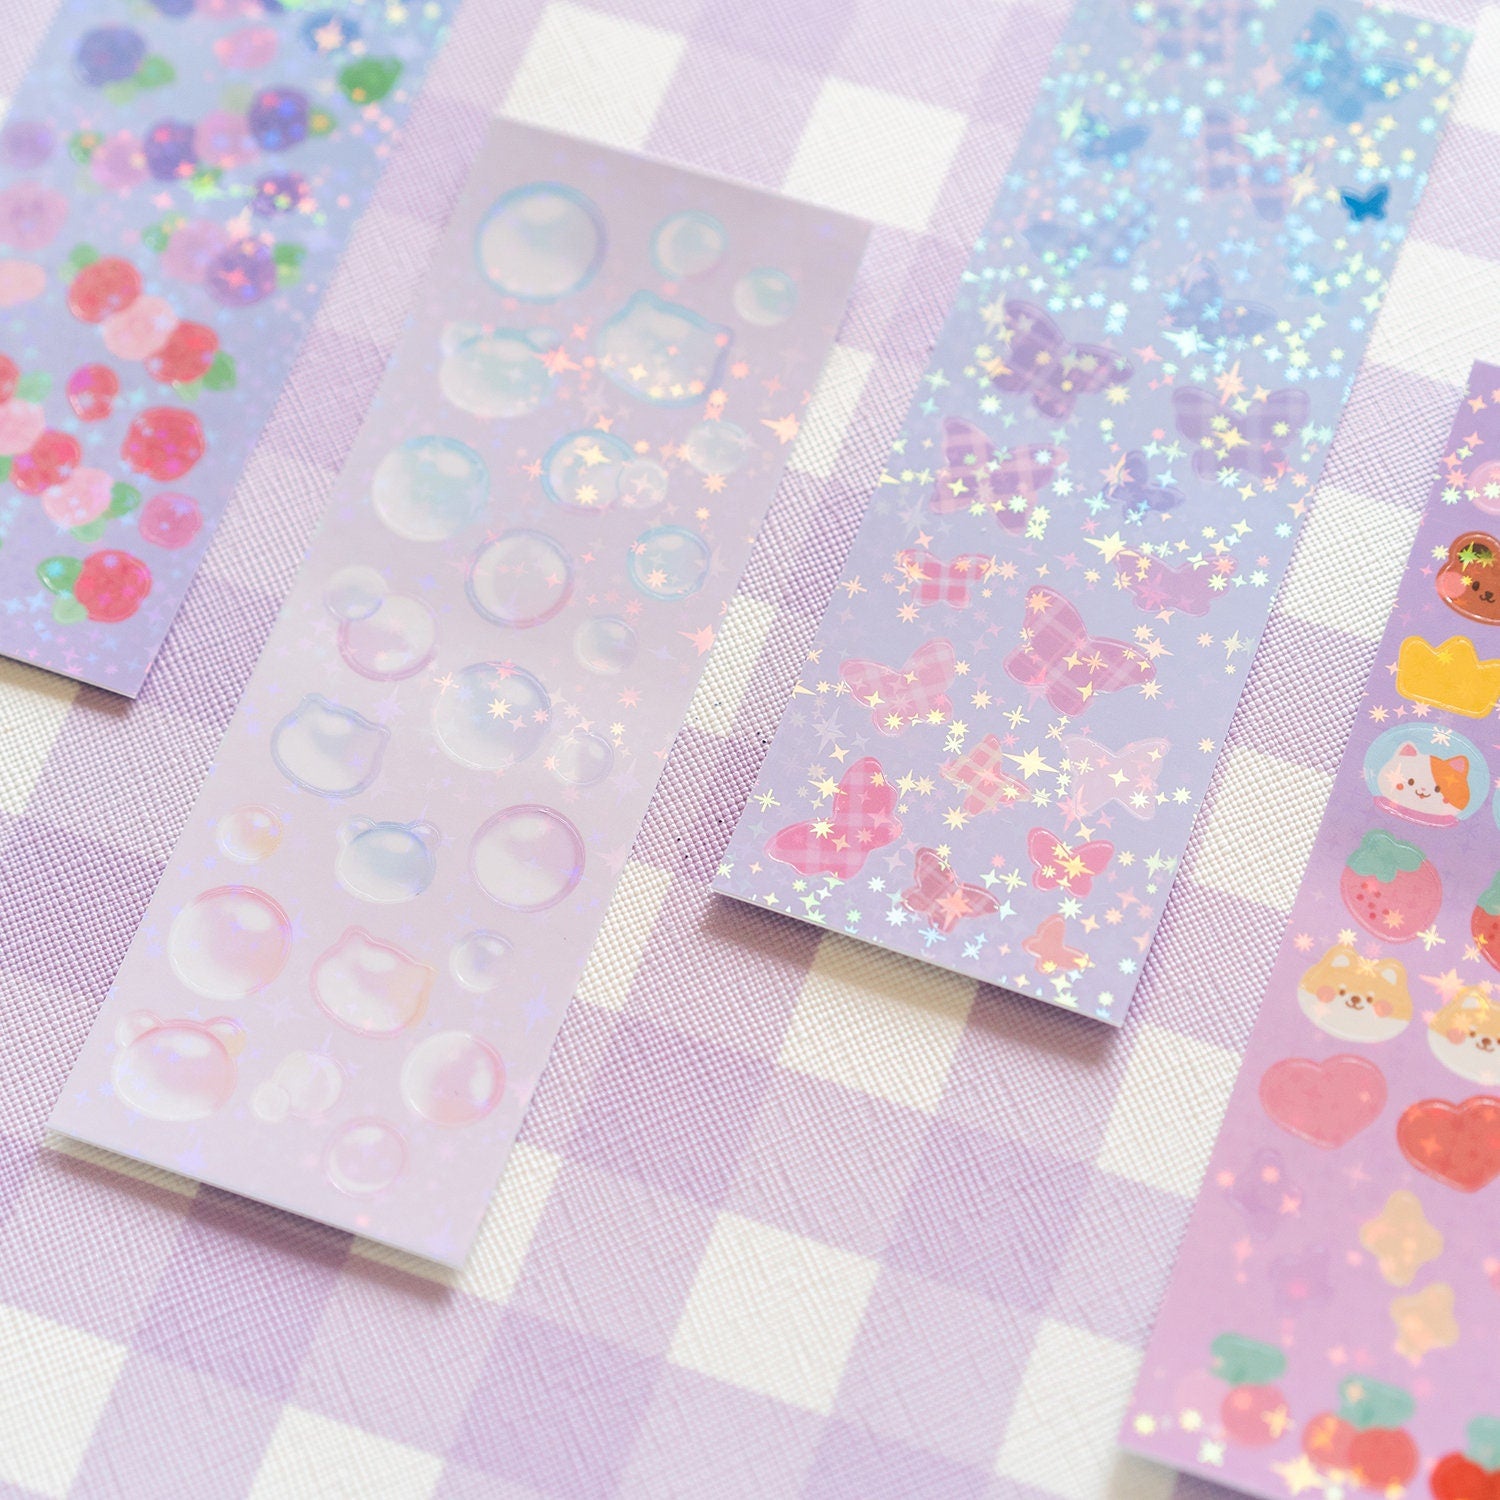 Holo Laminate Sheets, Toploader Deco Stickers, Kpop Deco Sheets, Star  Twinkle Heart Polco Stickers, Clear Bujo Stickers, Korean Journal 